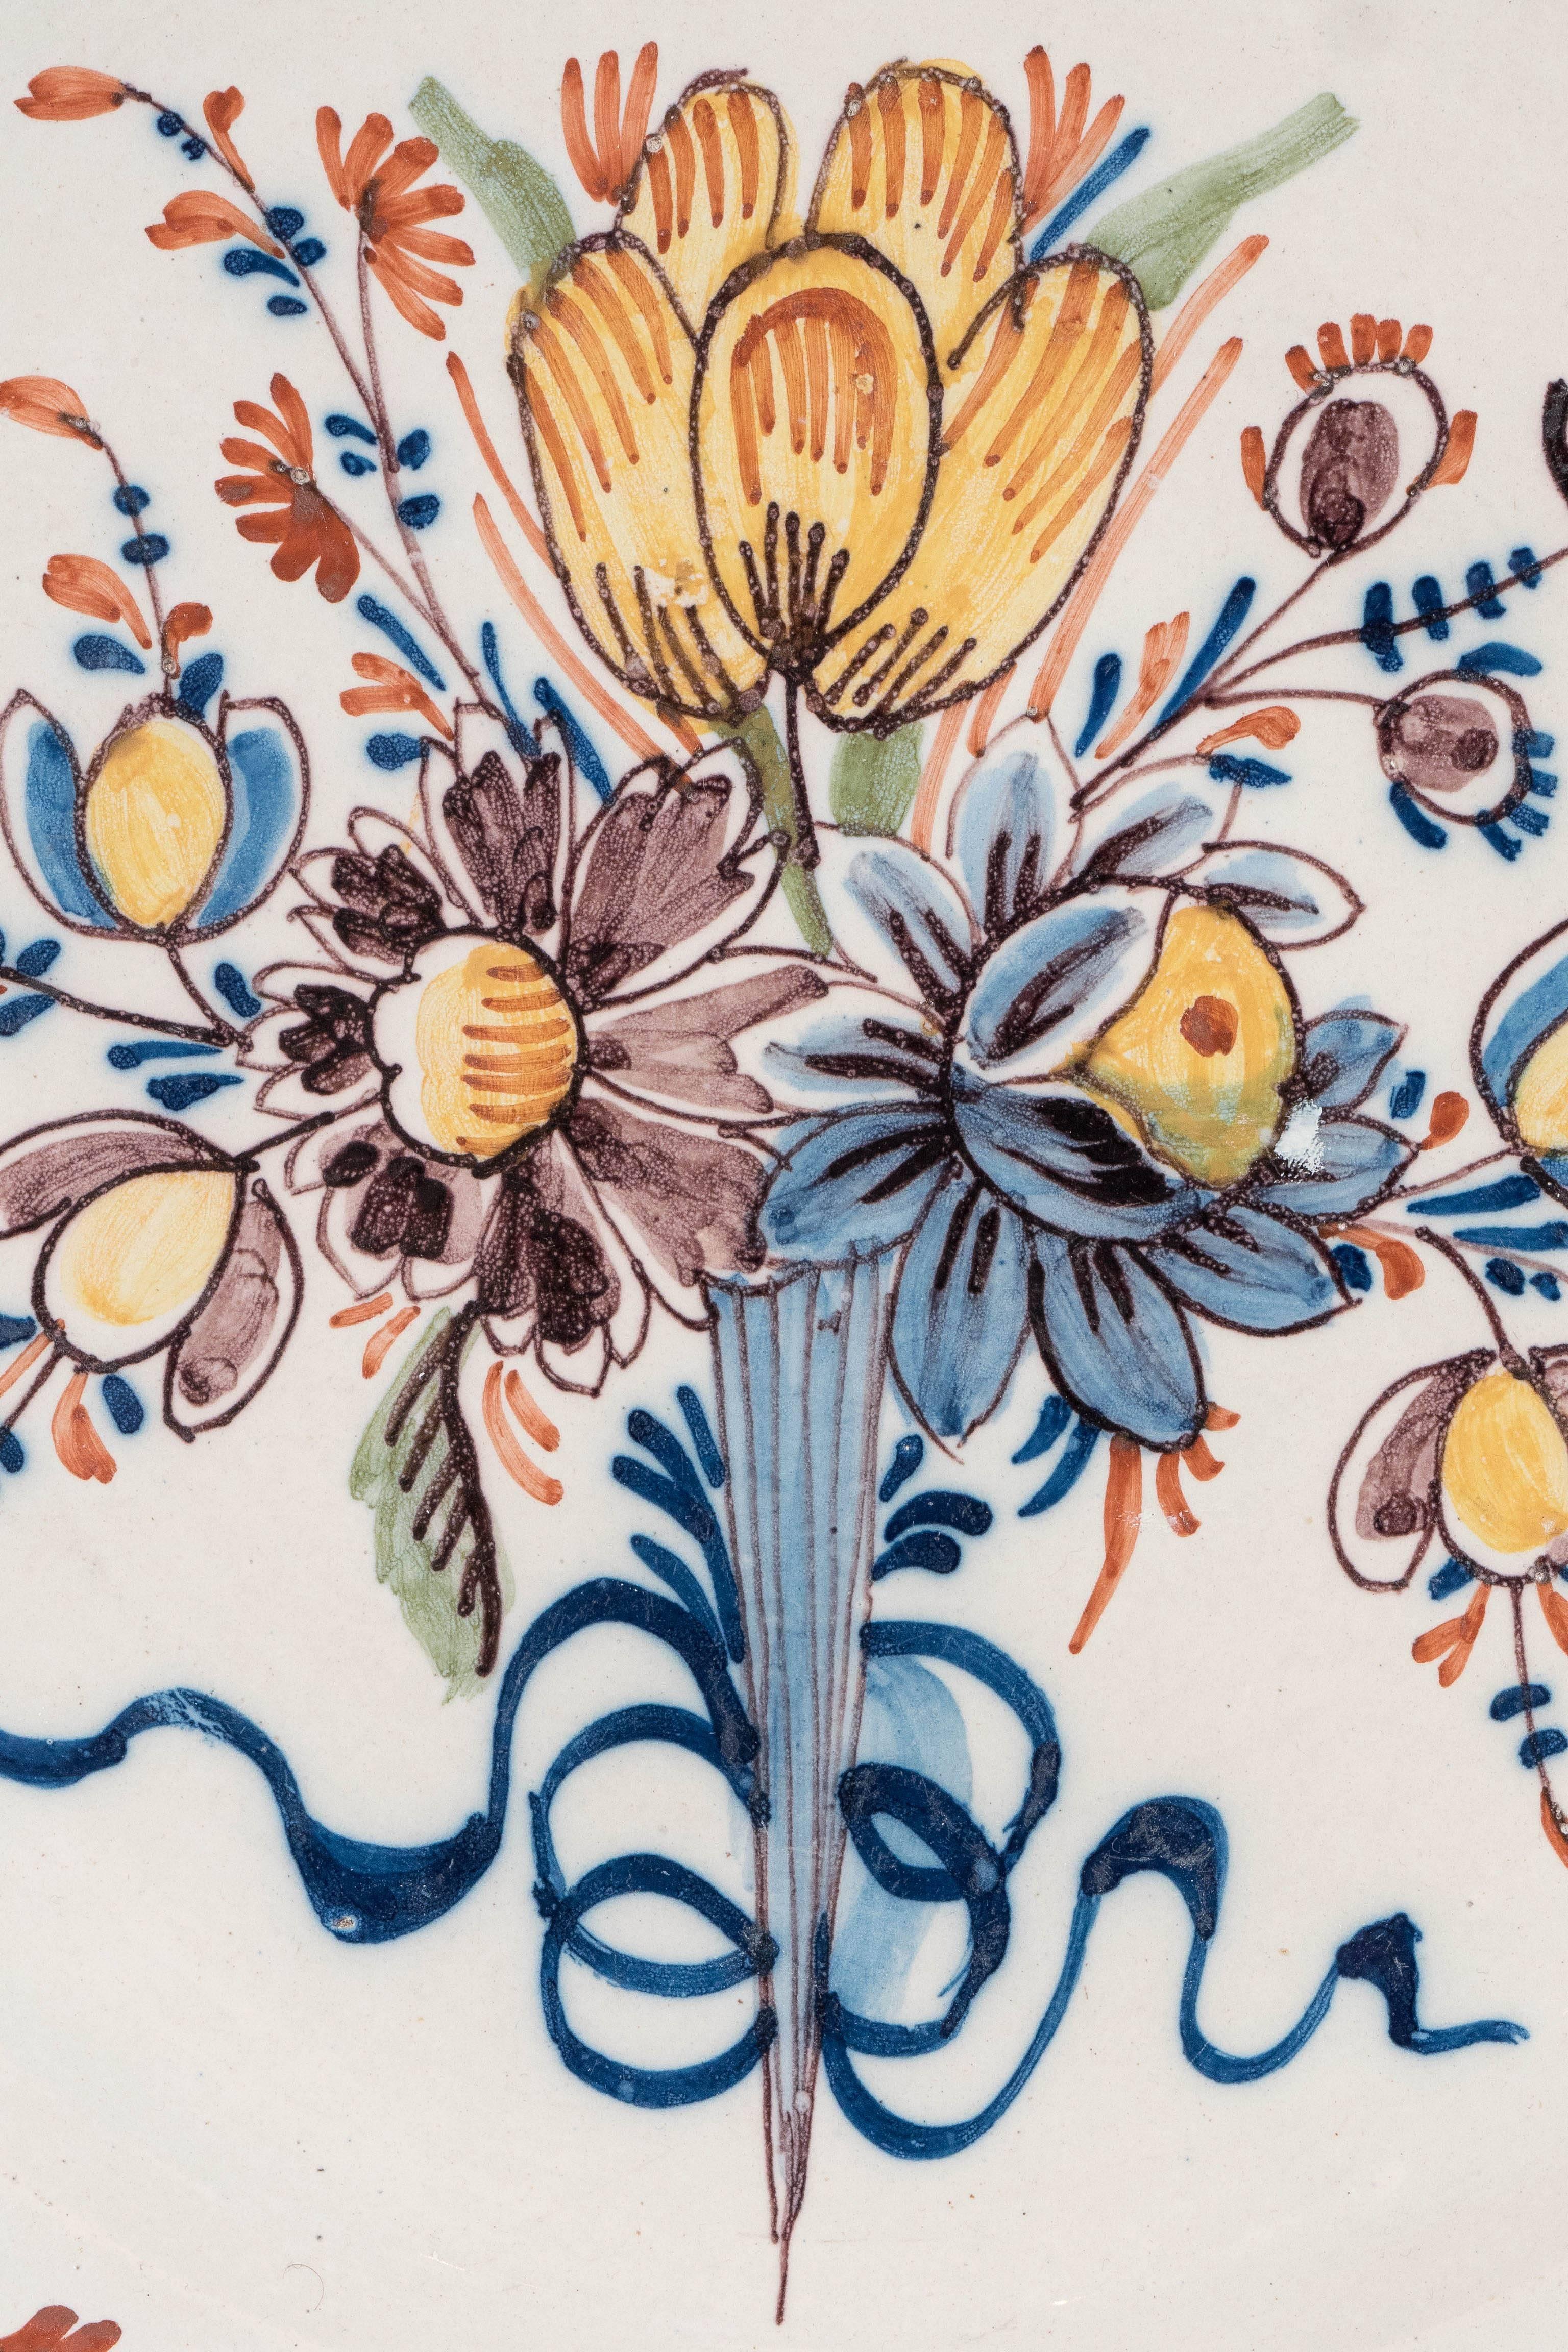 A late 18th or early 19th century Dutch delft charger featuring a bouquet of brightly colored tulips and other flowers painted in yellow, manganese, and blue. The border is painted with flower heads and scrolling vines in the same colors.